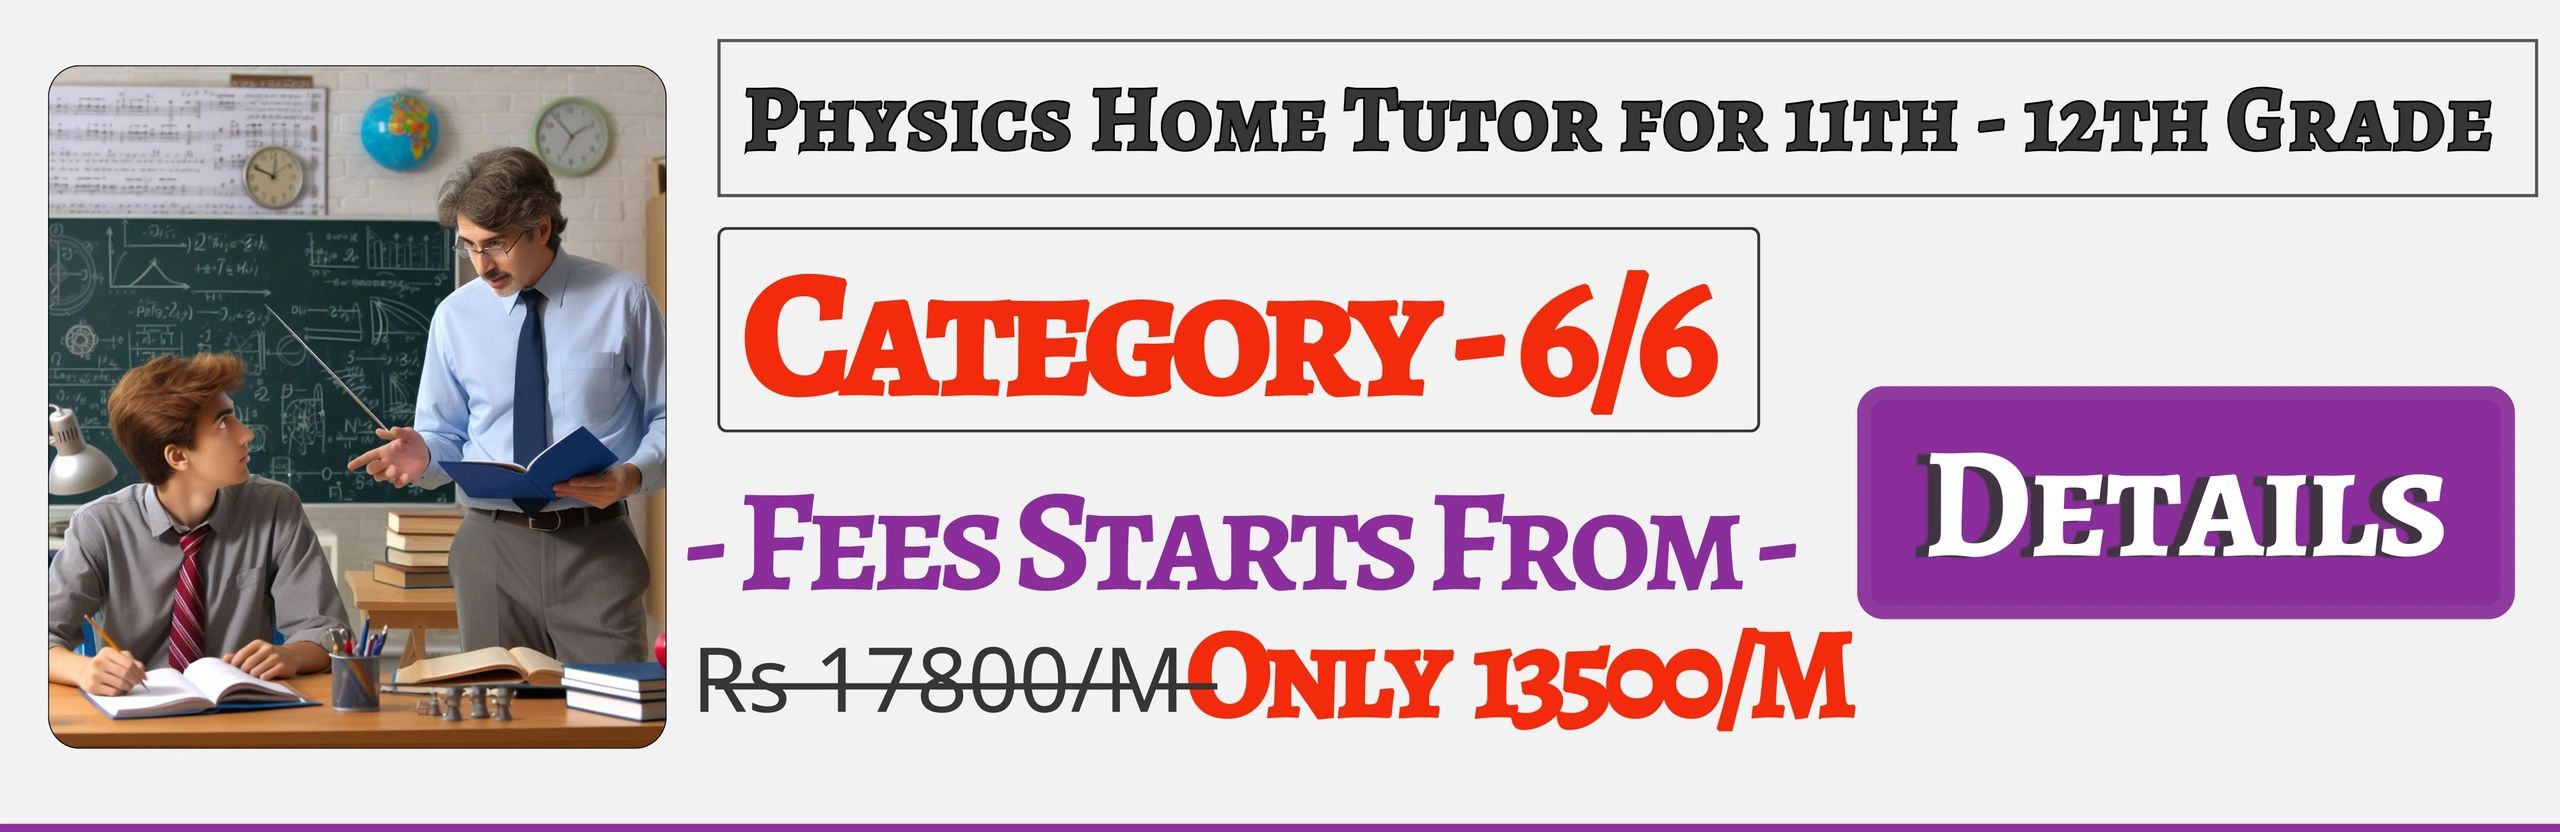 Book Best Nearby Physics Home Tuition Tutors For 11th & 12th In Jaipur , Fees Only 13500/M